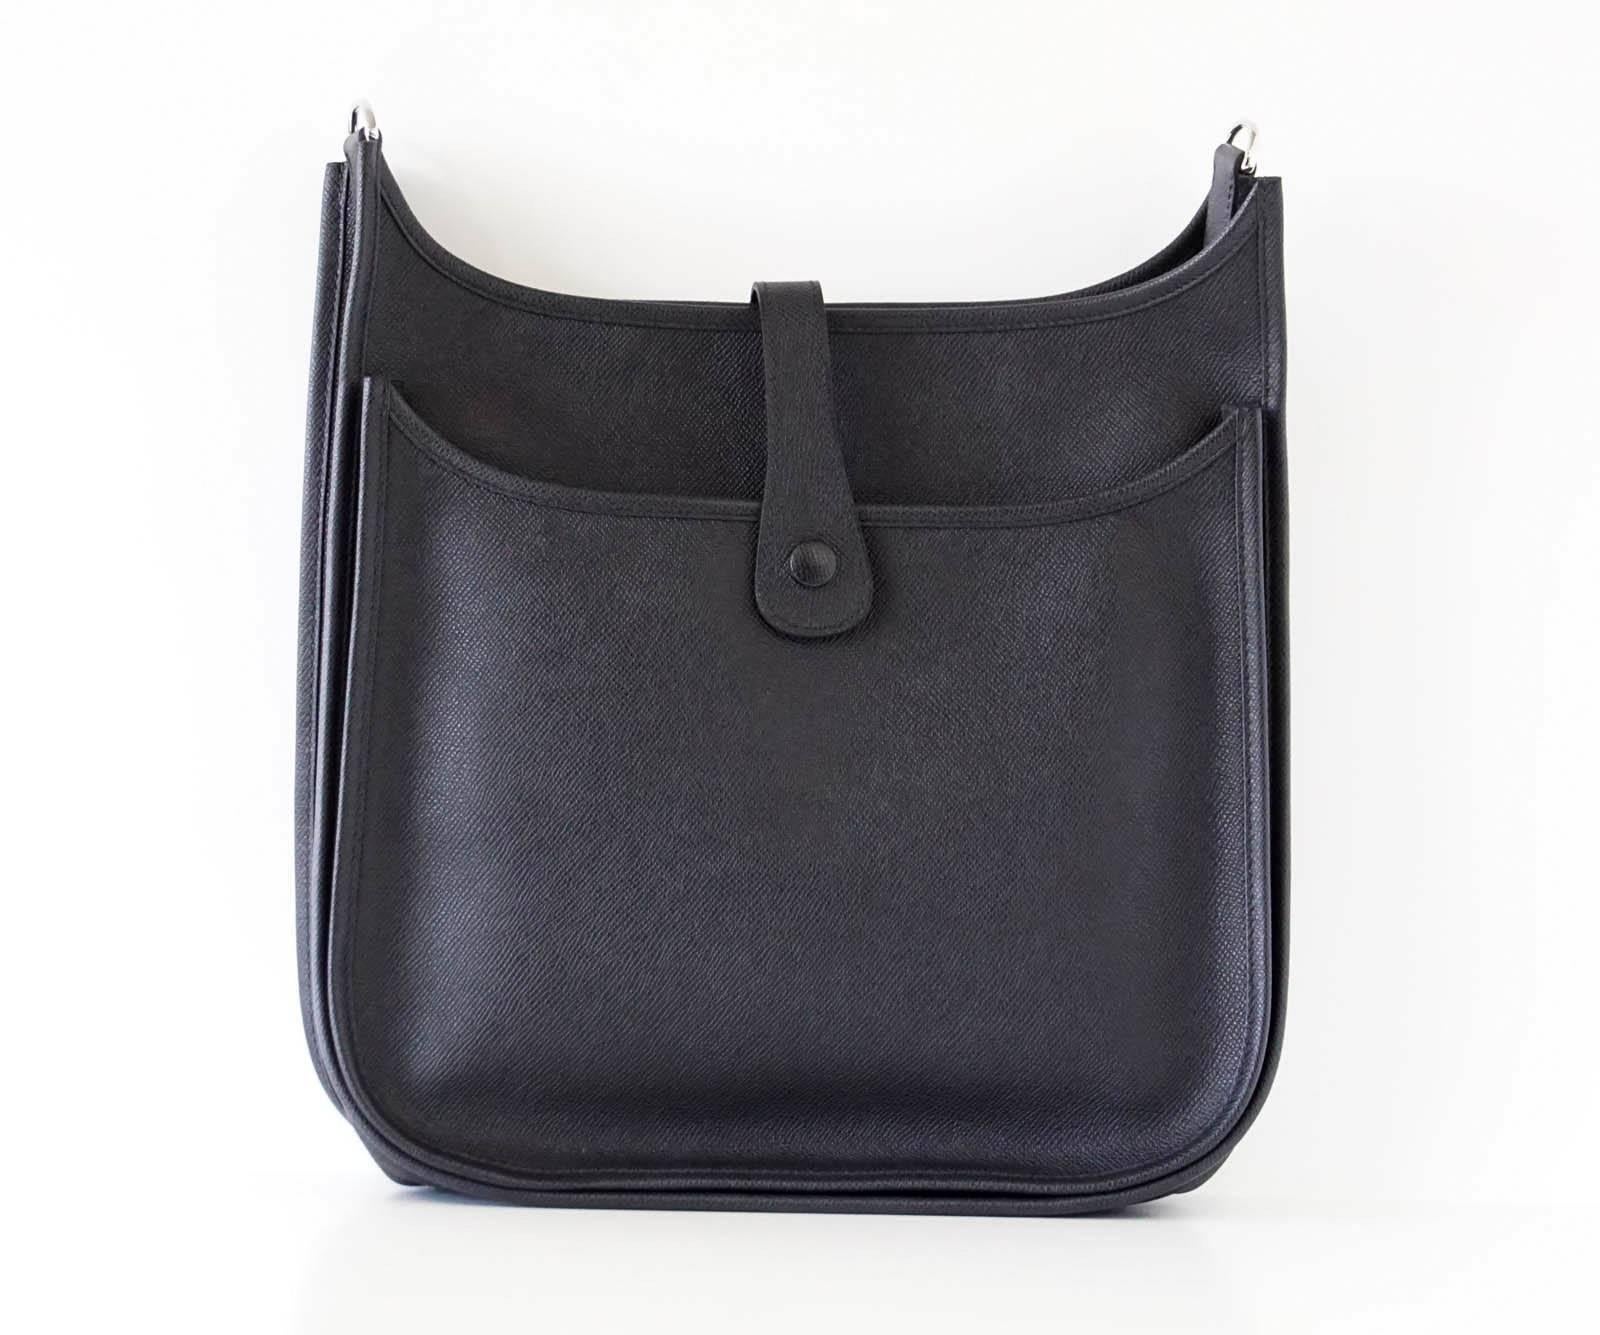 Guaranteed authentic Hermes Black EVELYNE lll GM in supple soft Epsom Soupple. 
Shoulder or cross body bag with roomy interior.
Rear outside deep pocket with snap closure.
Sport strap in textile with leather and palladium hardware